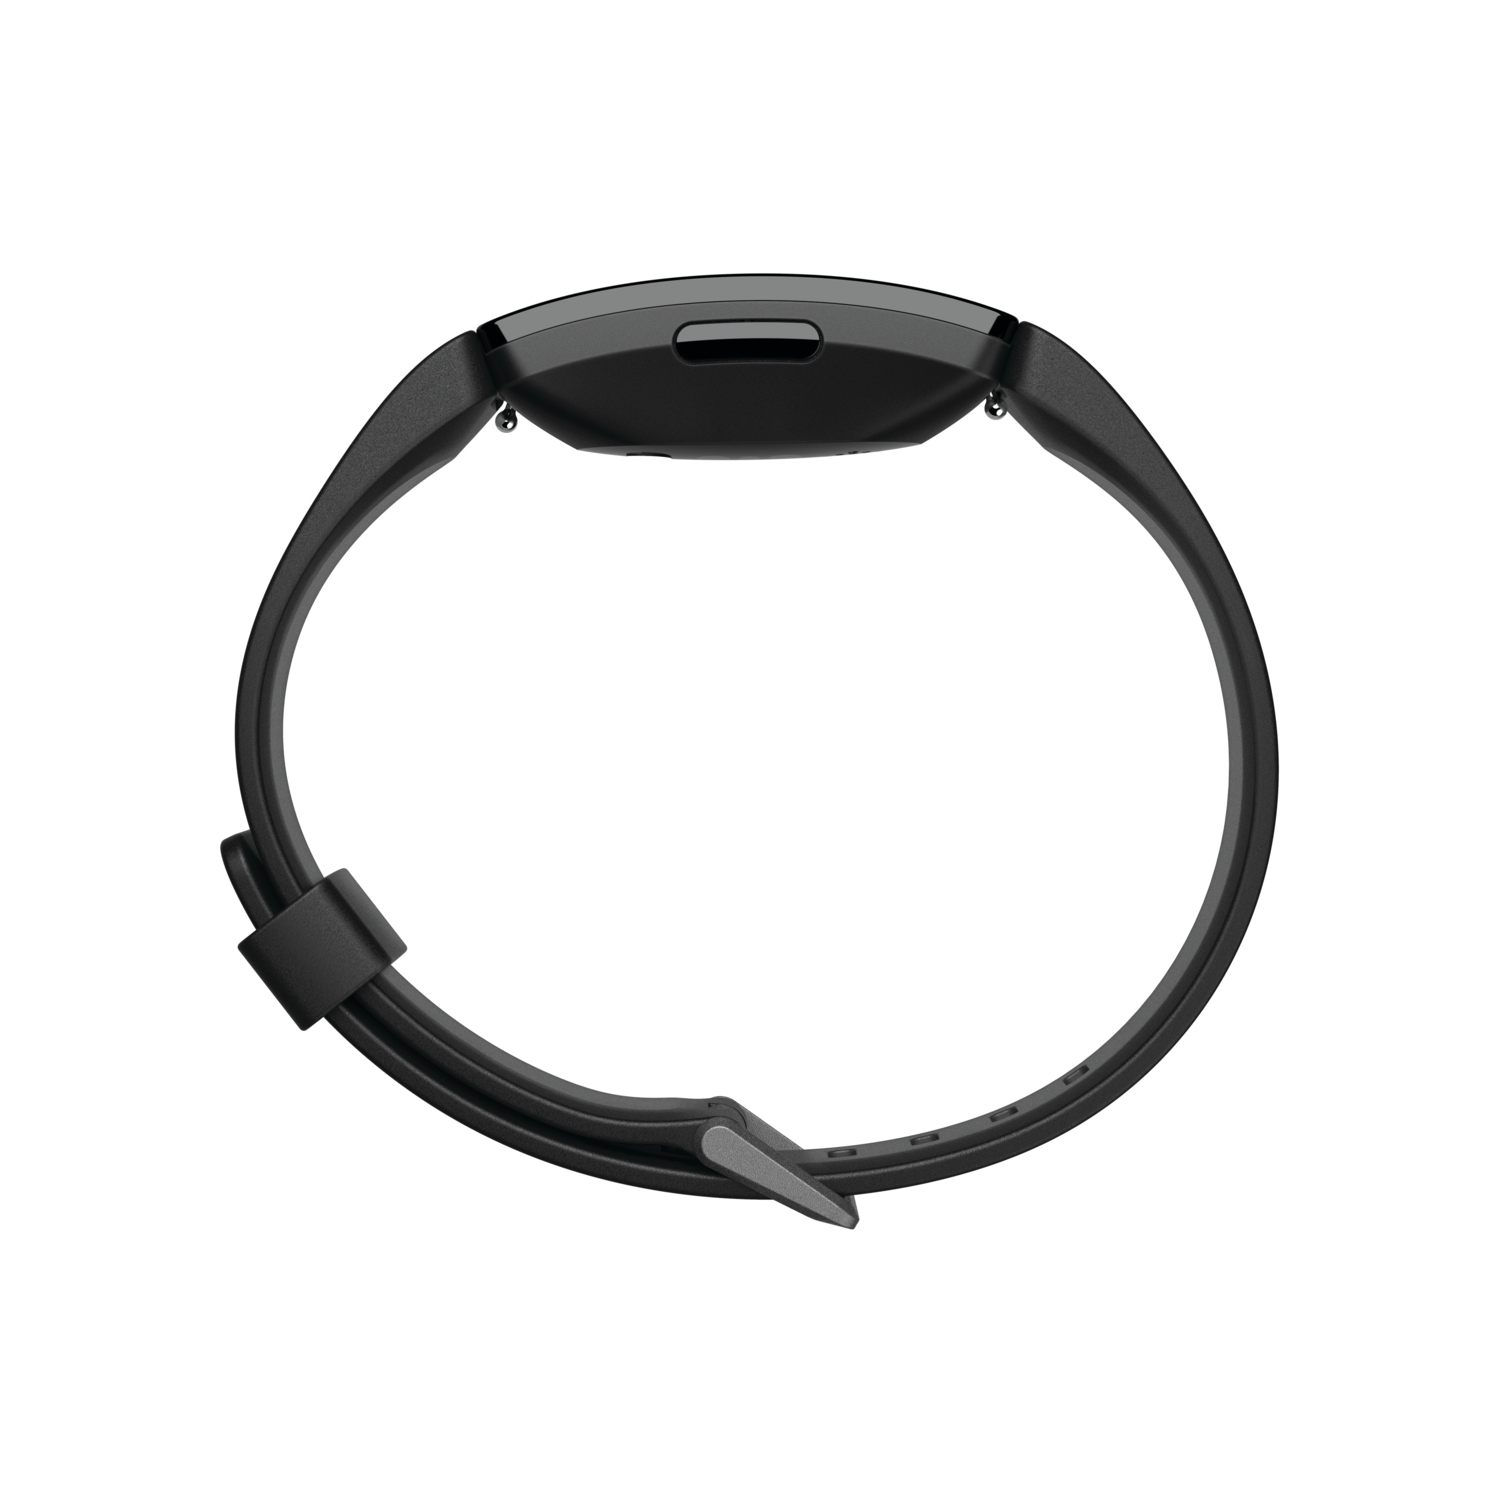 Fitbit Inspire HR Fitness Tracker + Heart Rate, Black, Small and Large Wristbands - image 4 of 9